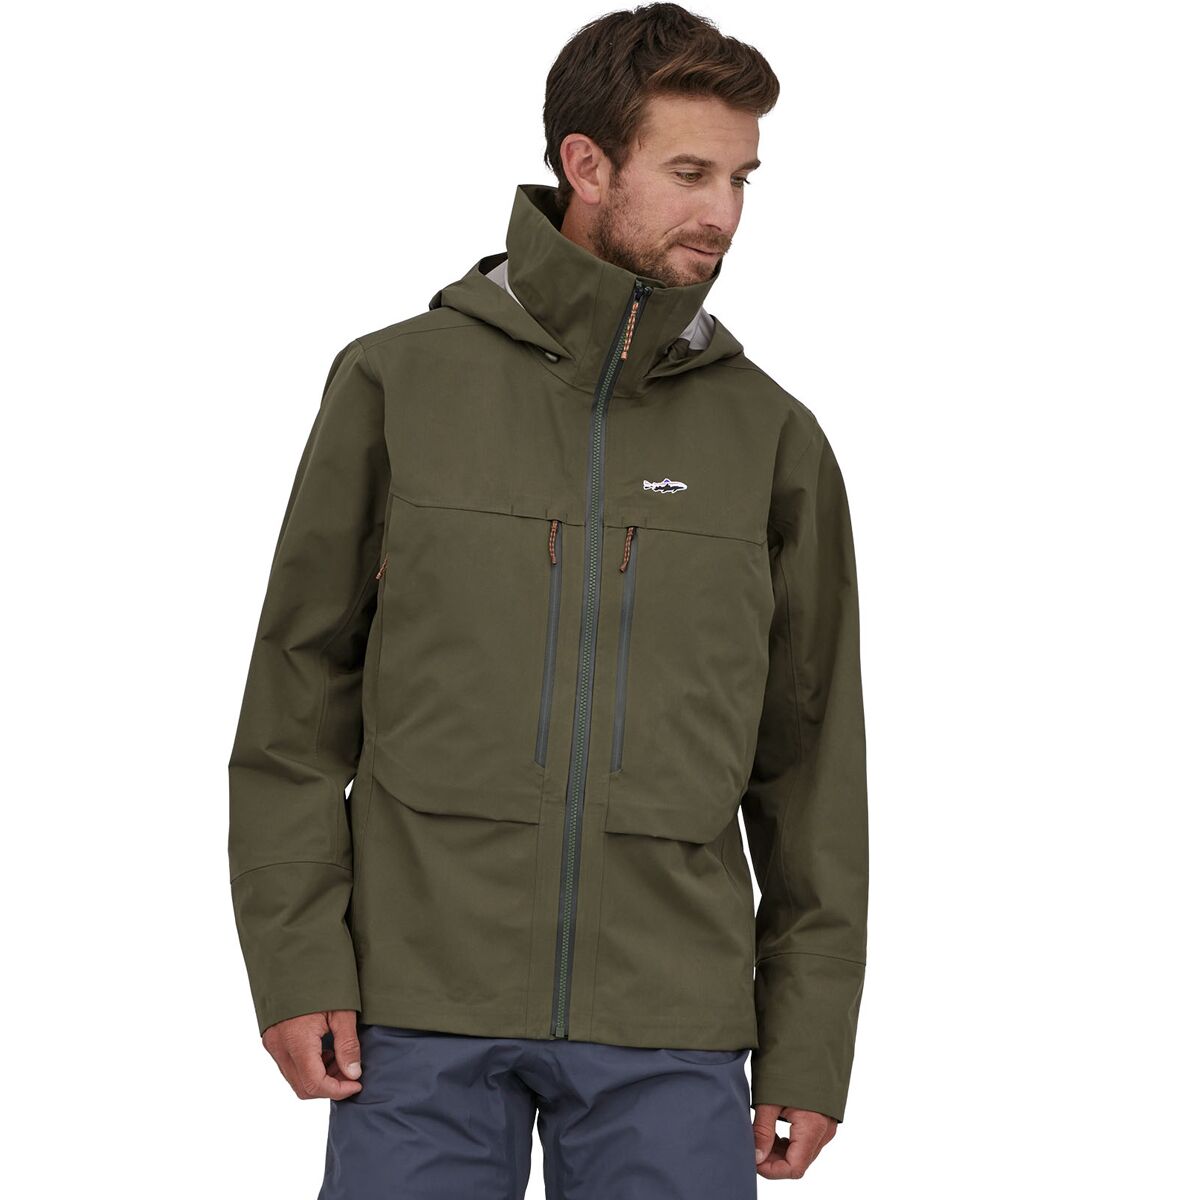 Patagonia Swiftcurrent Jacket - Men's - Fly Fishing | Backcountry